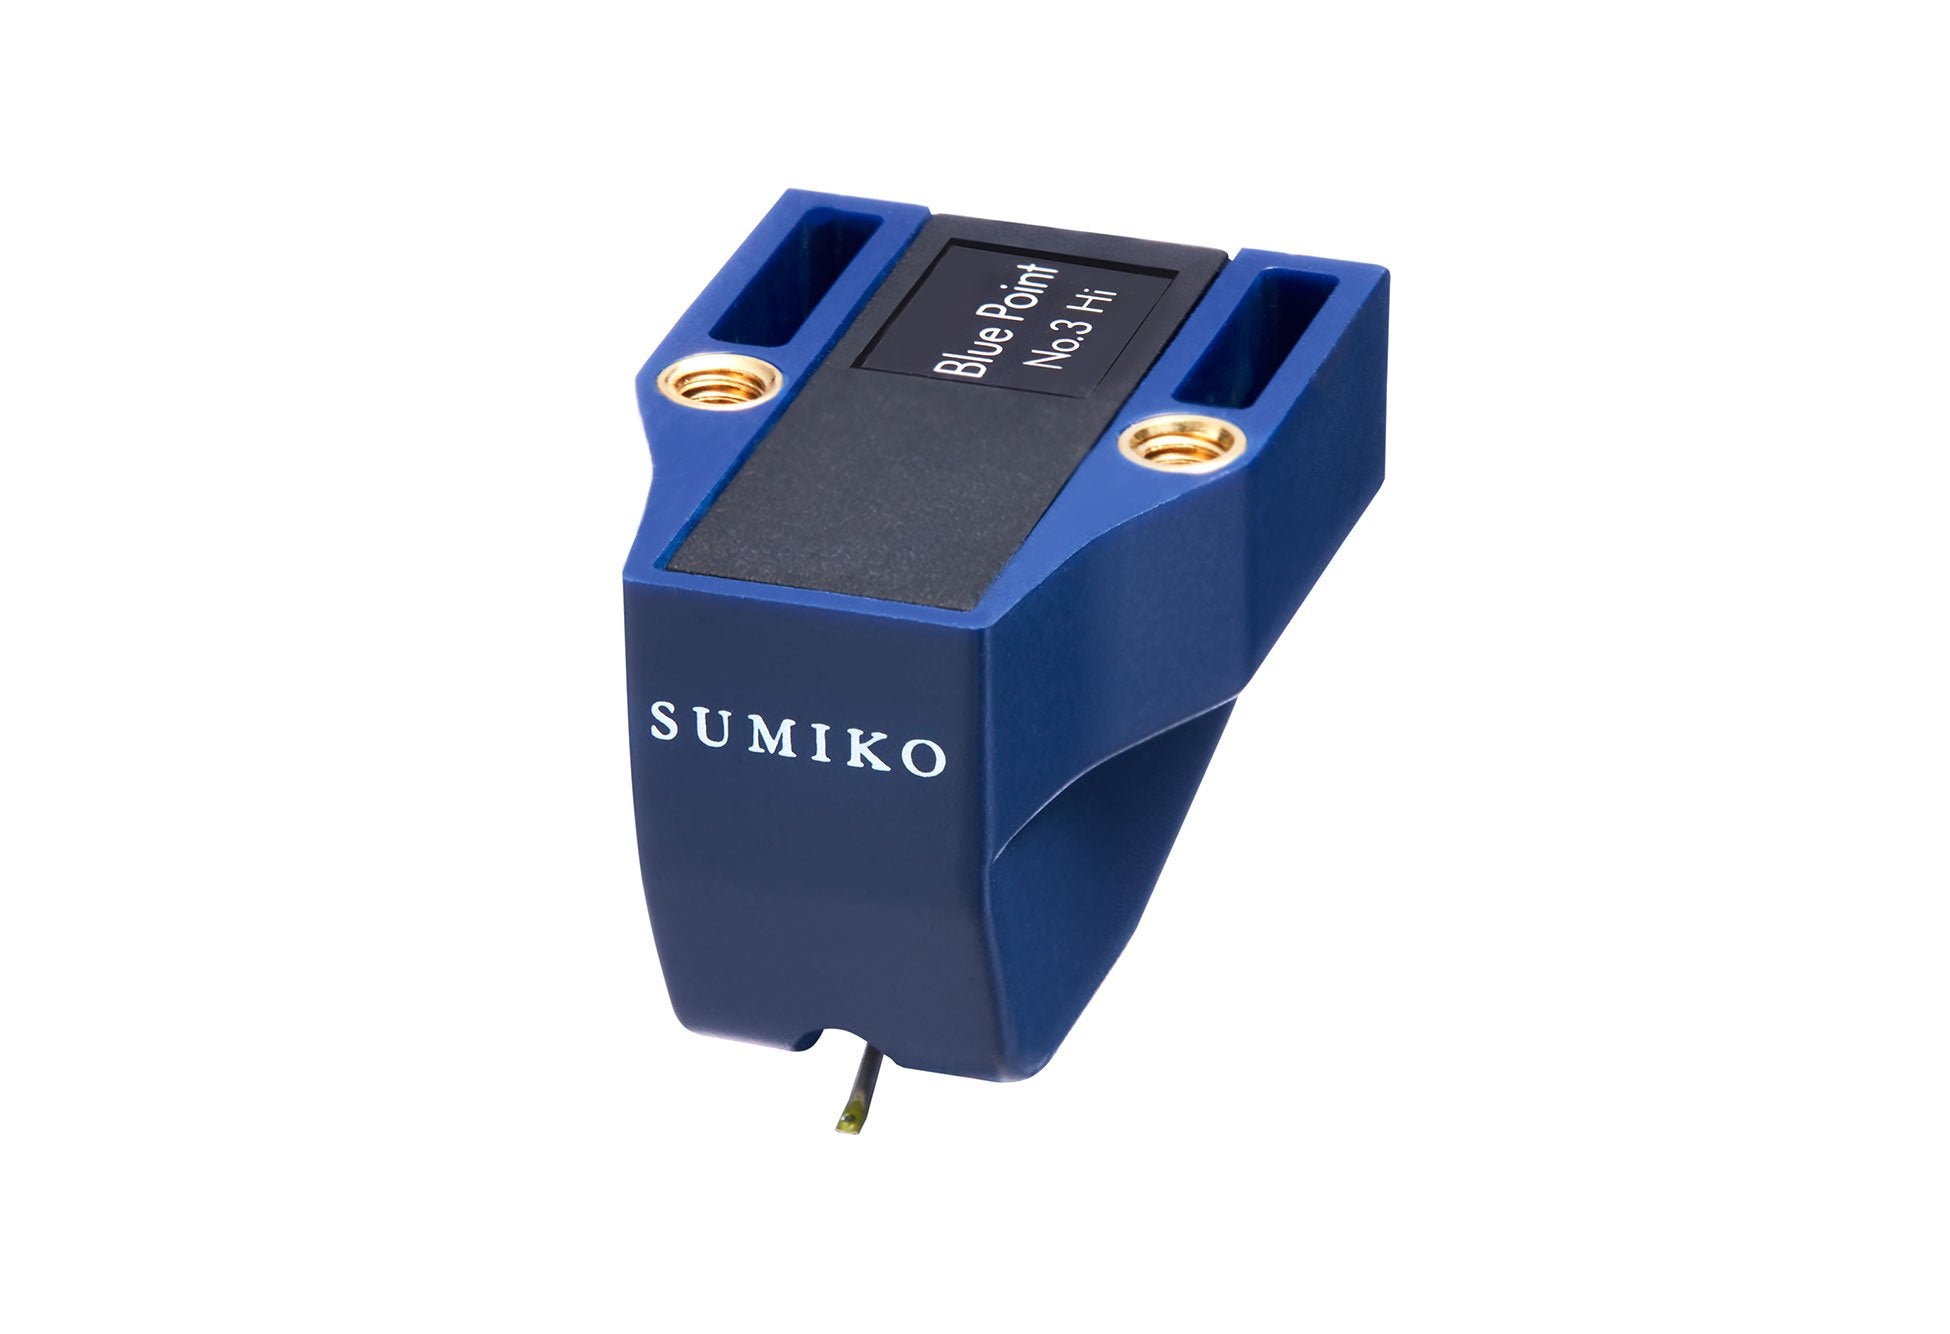 Sumiko Blue Point No. 3 Moving Coil Cartridge – Upscale Audio